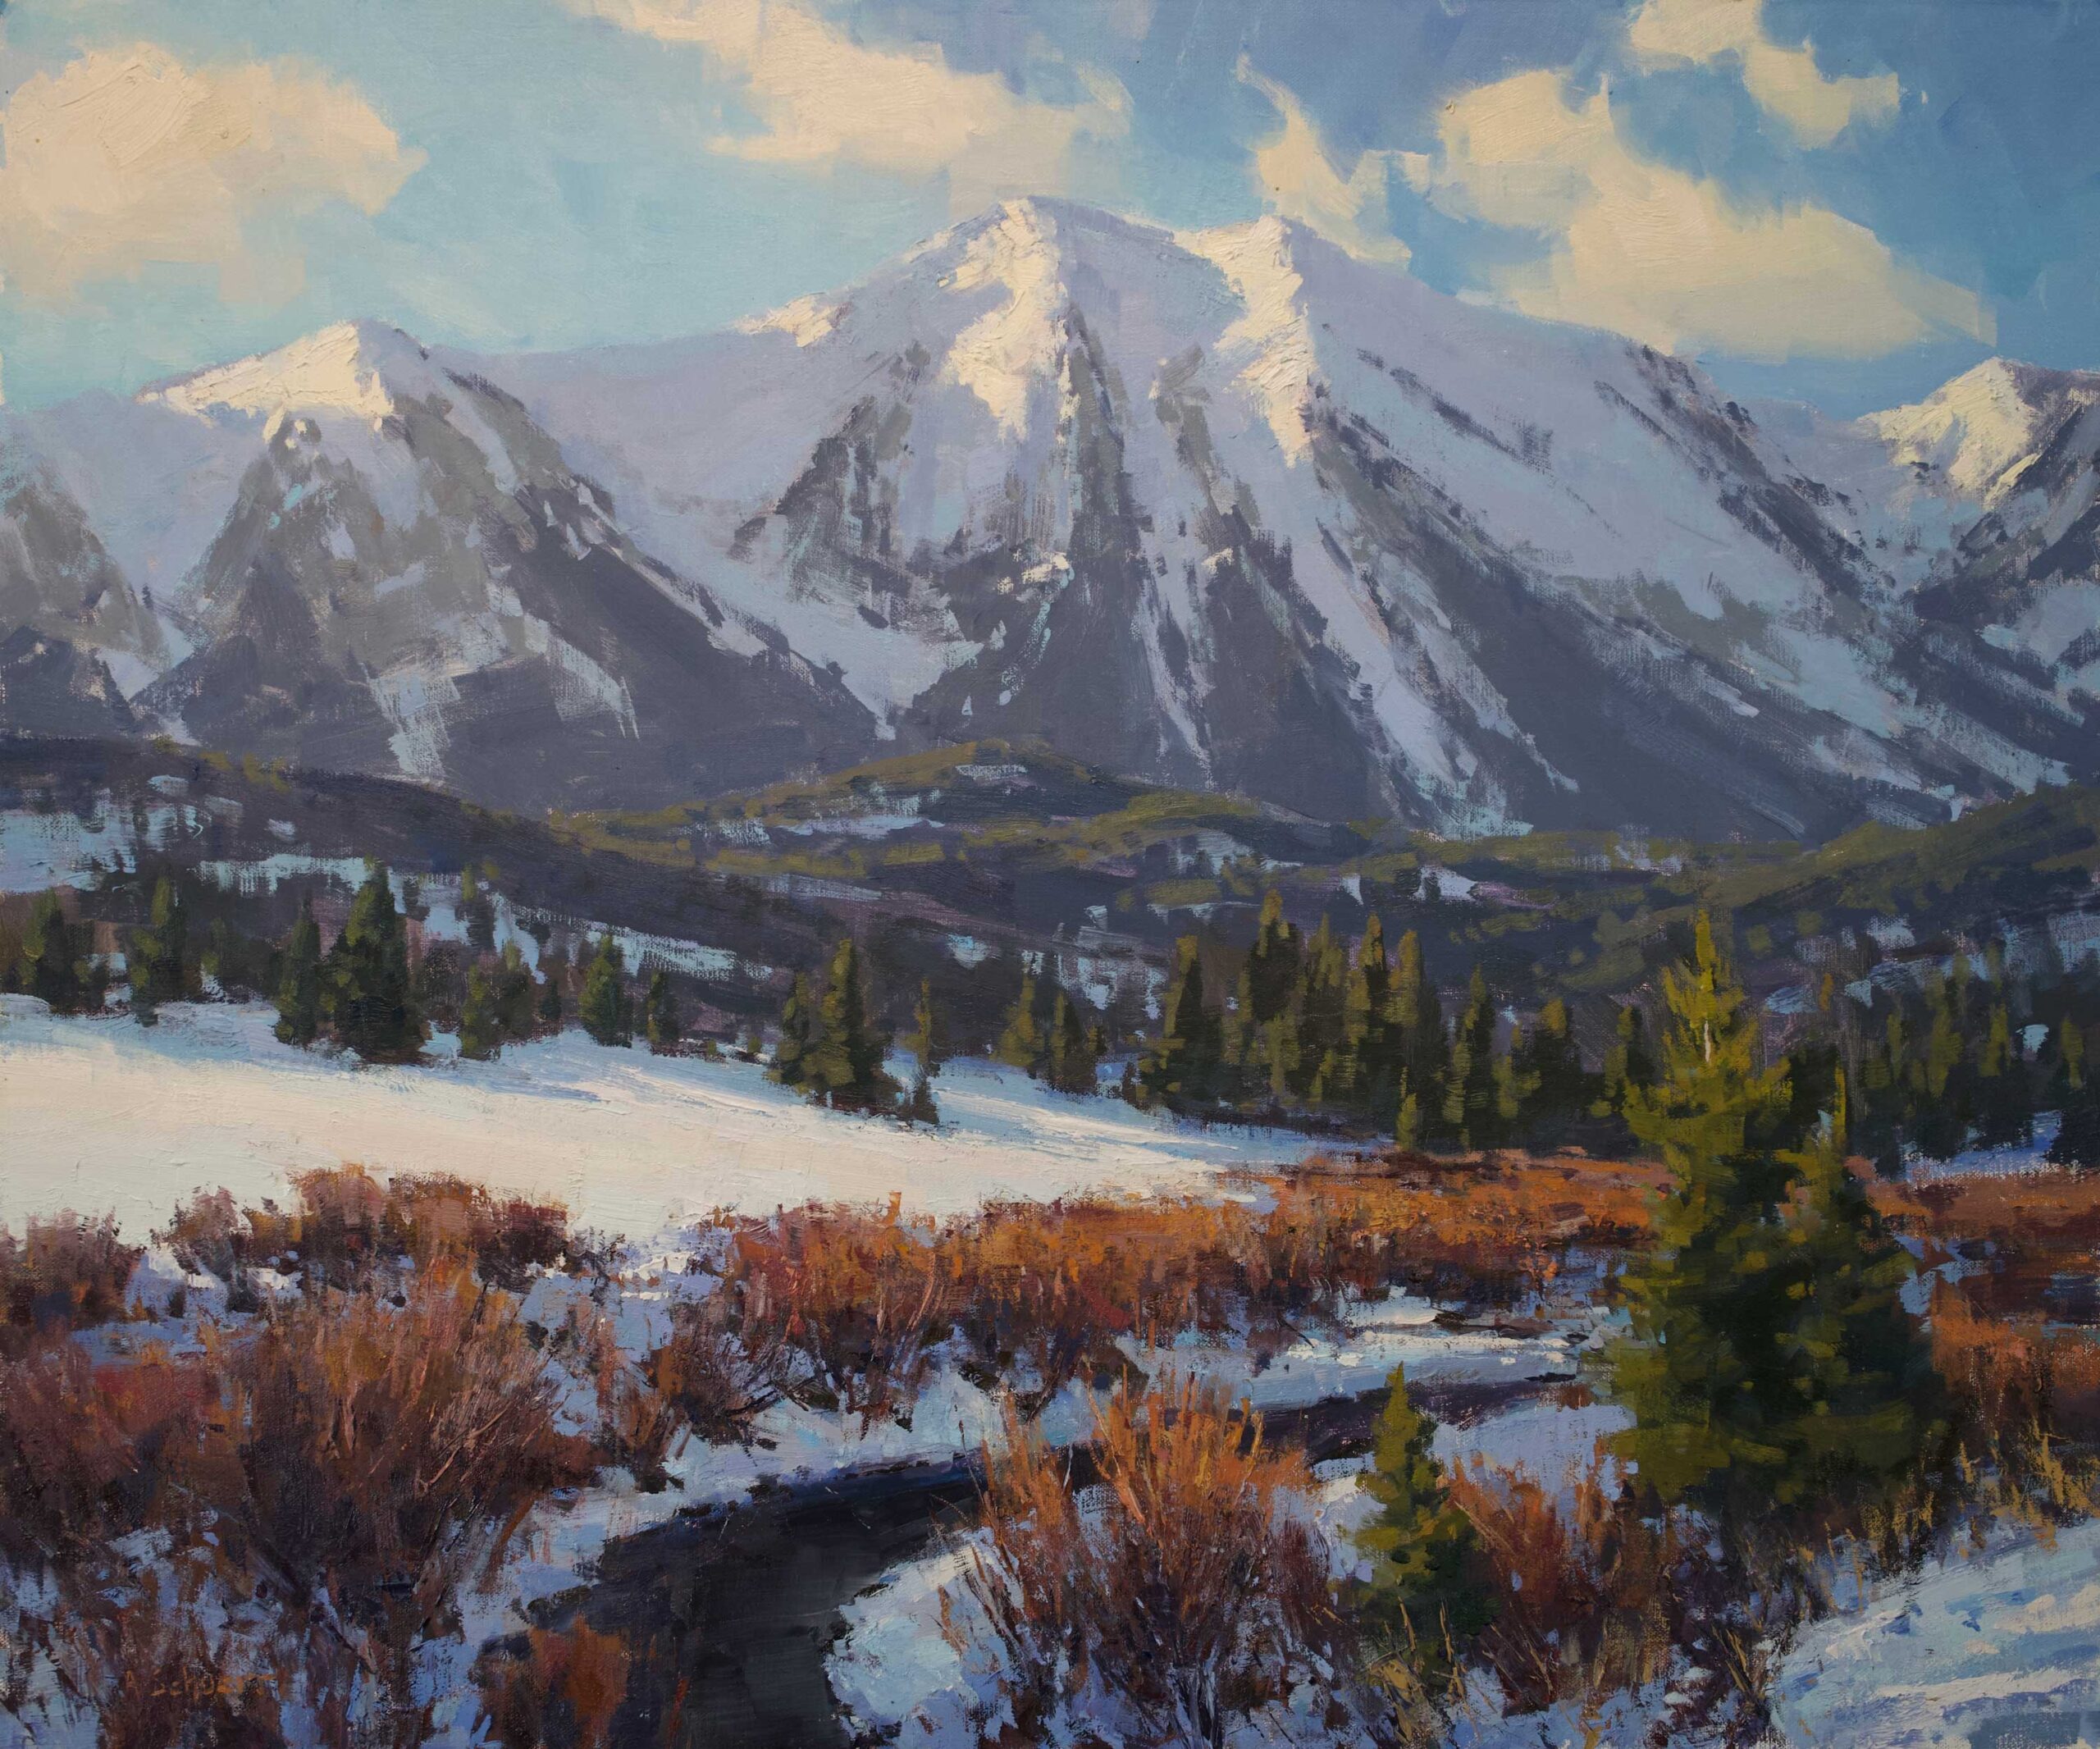 Aaron Schuerr, "Saddle Peak in December," 2019, oil, 20 x 24 in., Available from artist, Plein air